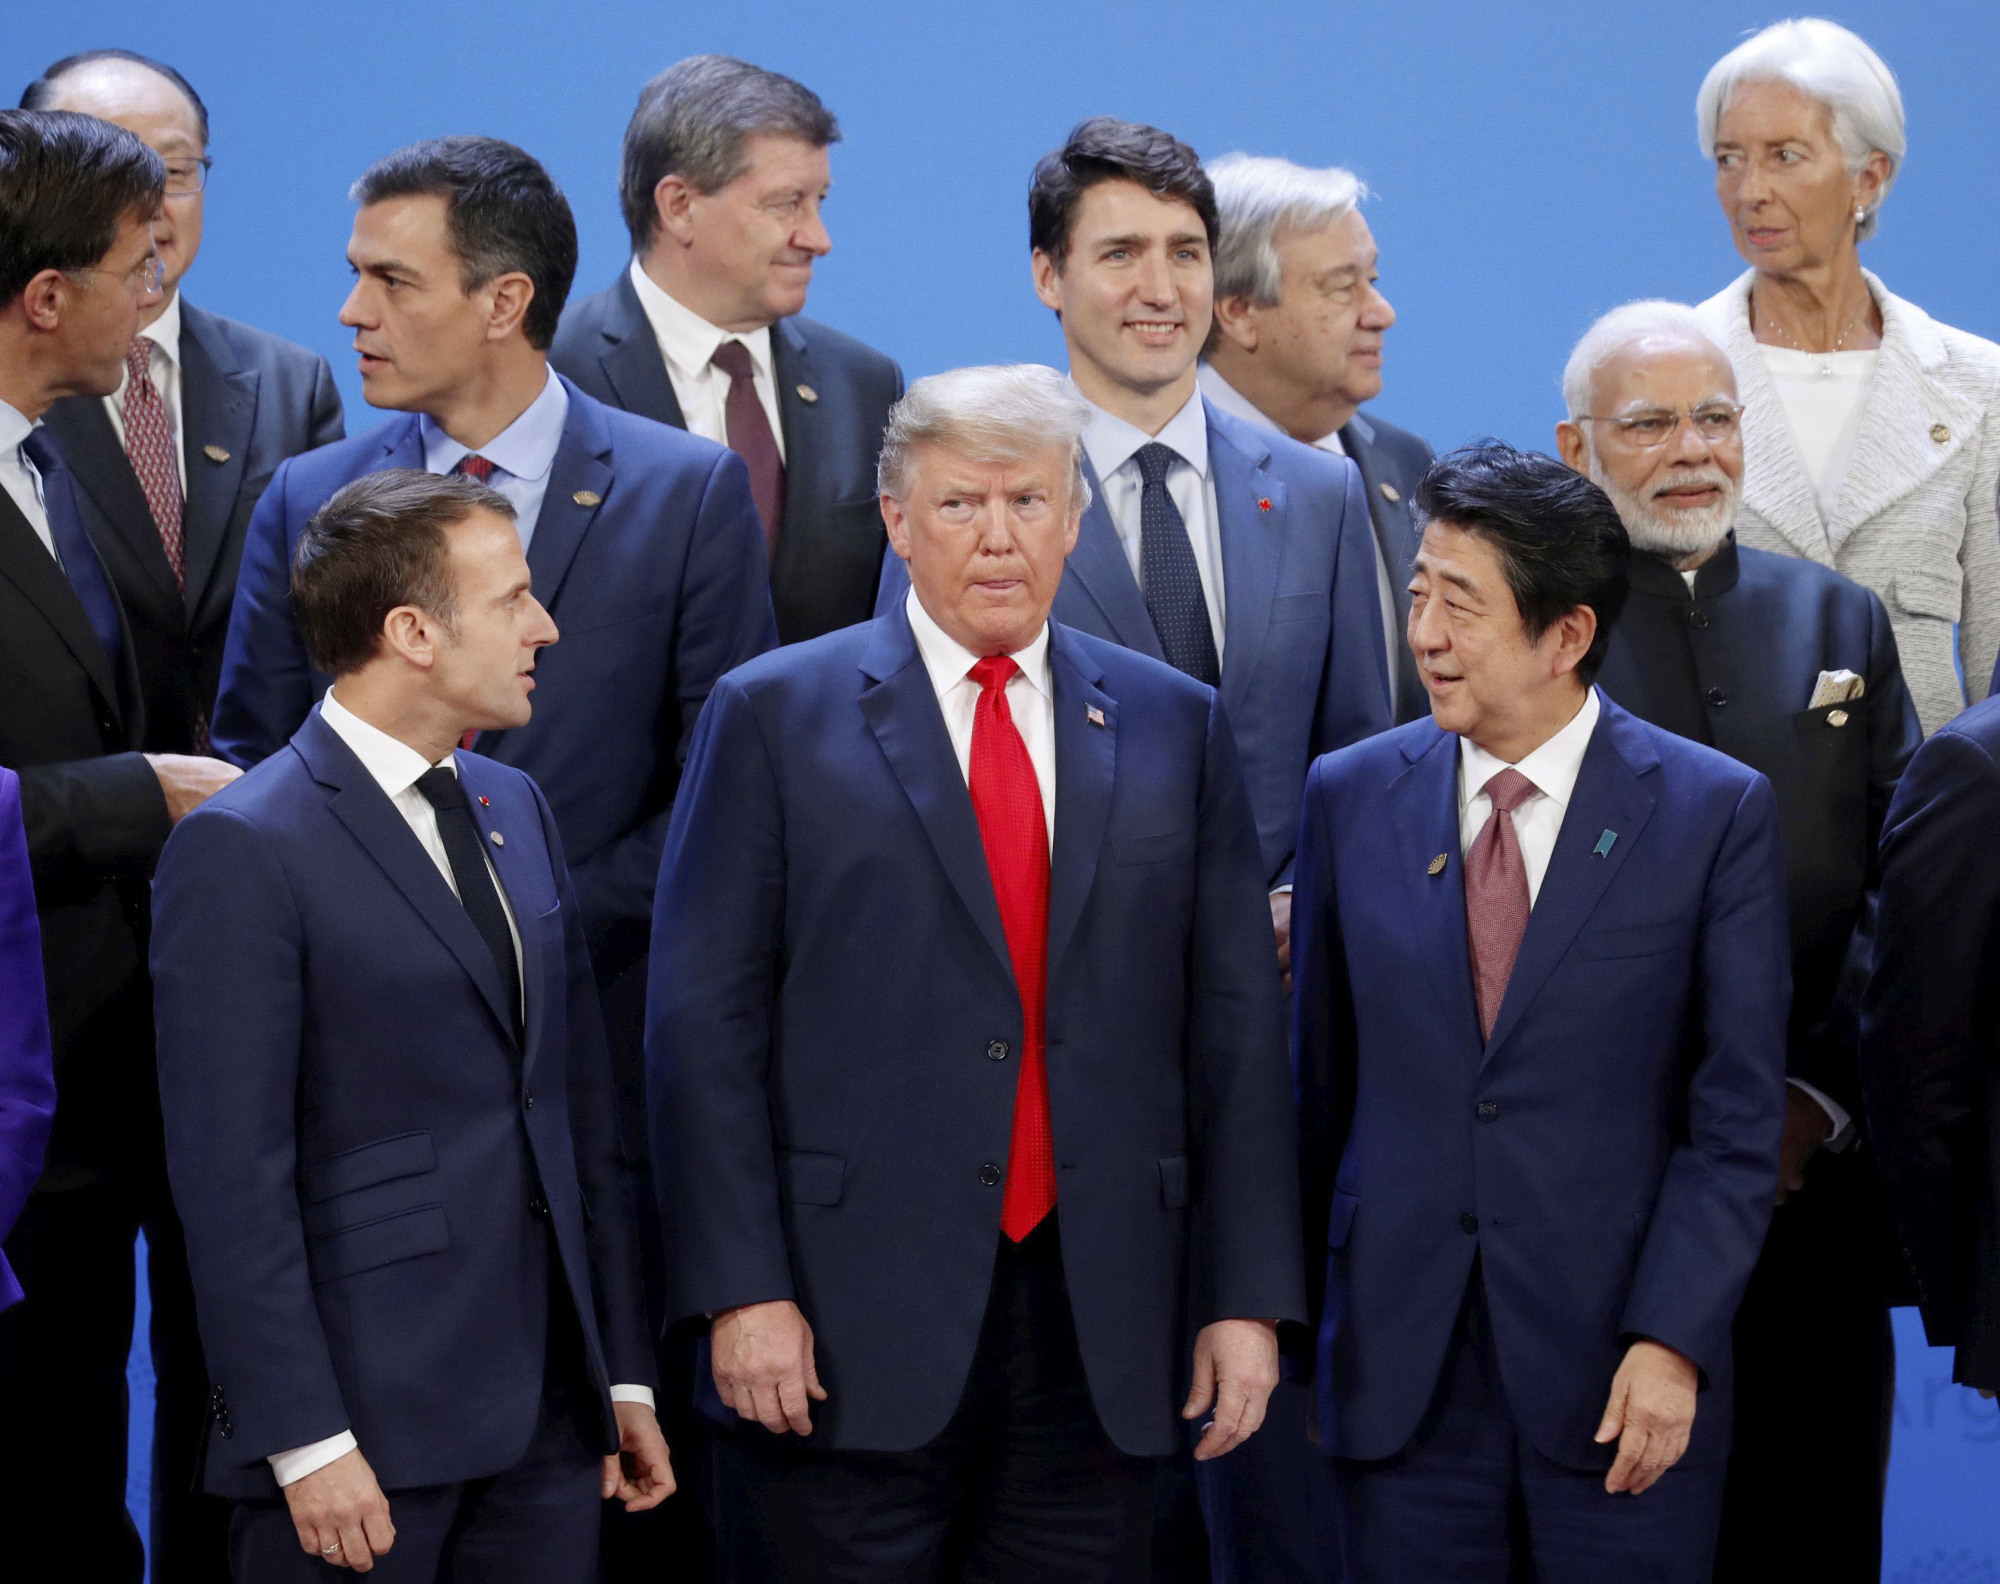 U.S. President Donald Trump and Prime Minister Shinzo Abe prepare for a photo-op during the Group of 20 summit in Buenos Aires last November. | REUTERS / VIA KYODO